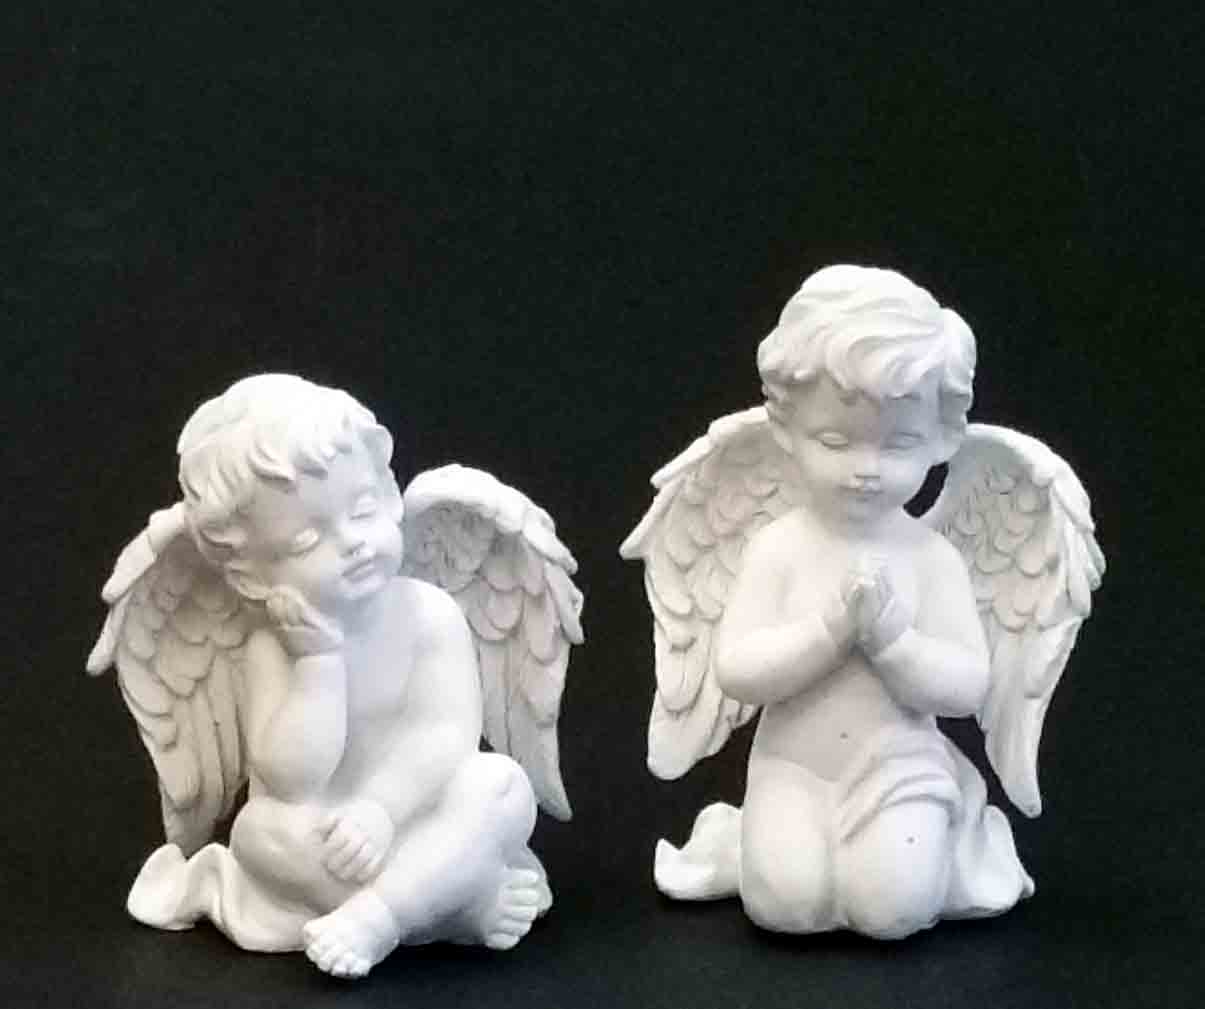 2049 - 3.5 and 4" Sitting Angels - 10.95 box of 2